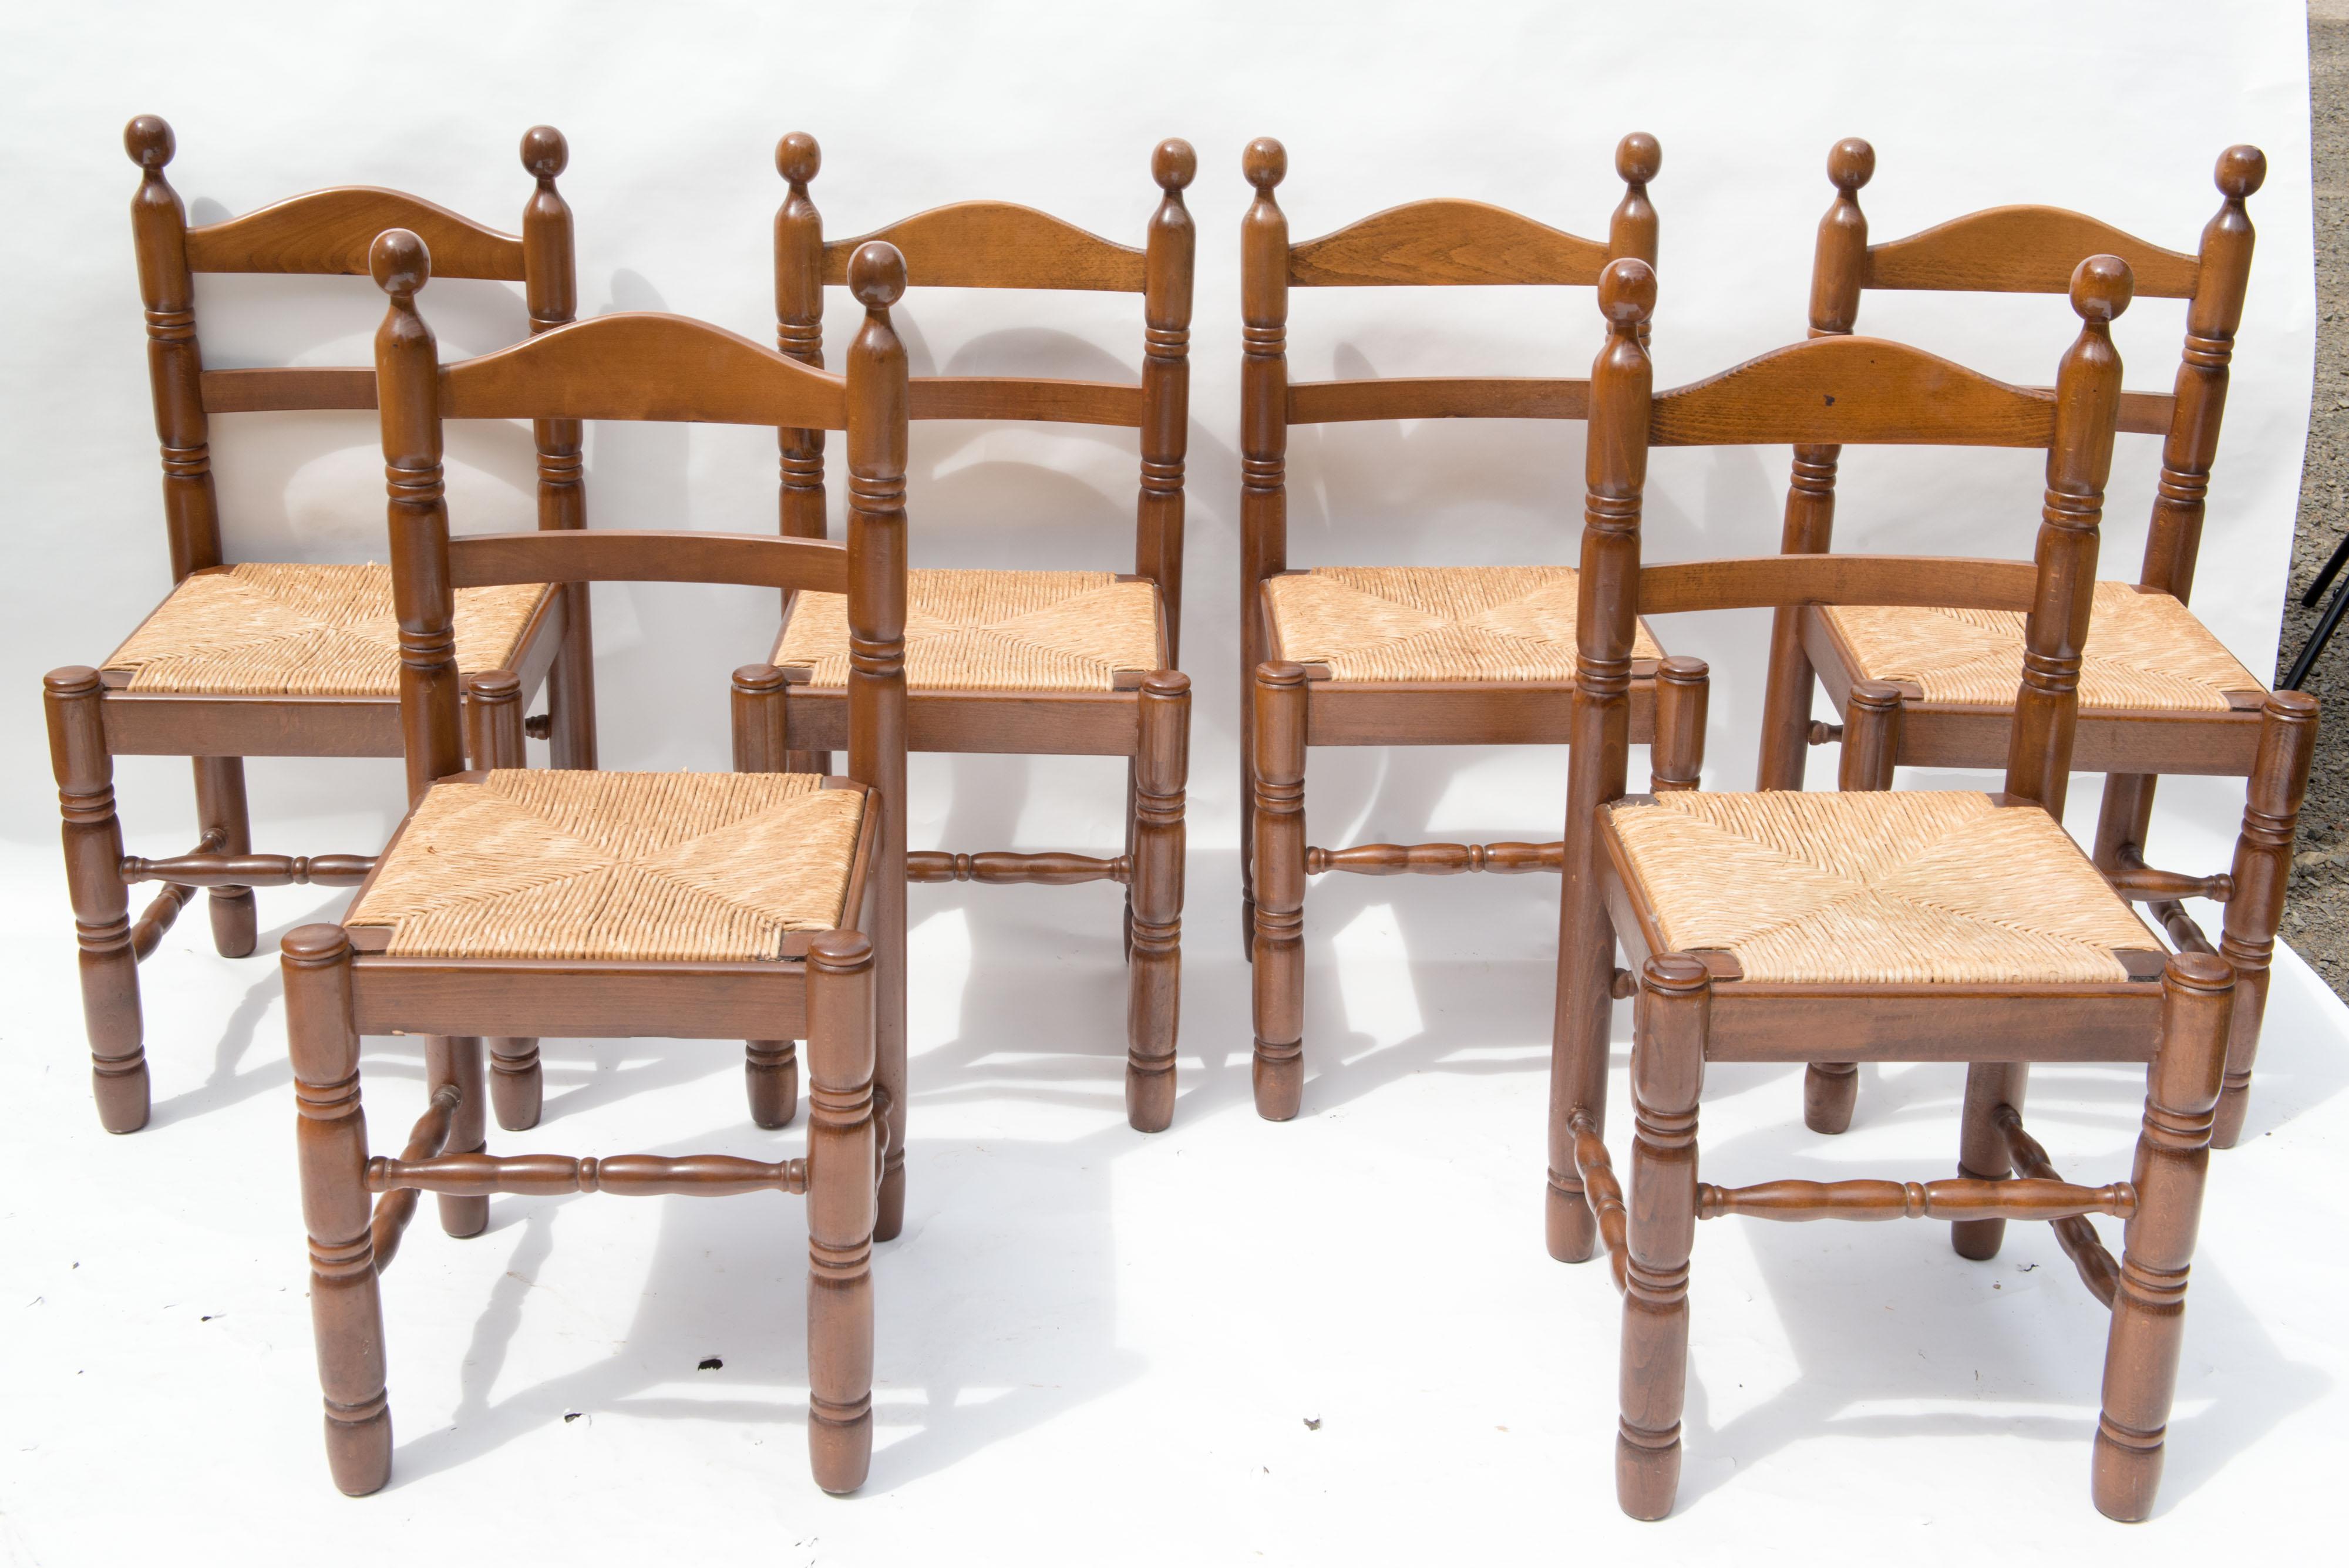 Set of six French ladder back, rush seat dining chairs. Beech frames with carved turnings on stretchers, legs, and back with ball finials. We have another set of six
very similar chairs. Wood frames and rush seats are in excellent condition.